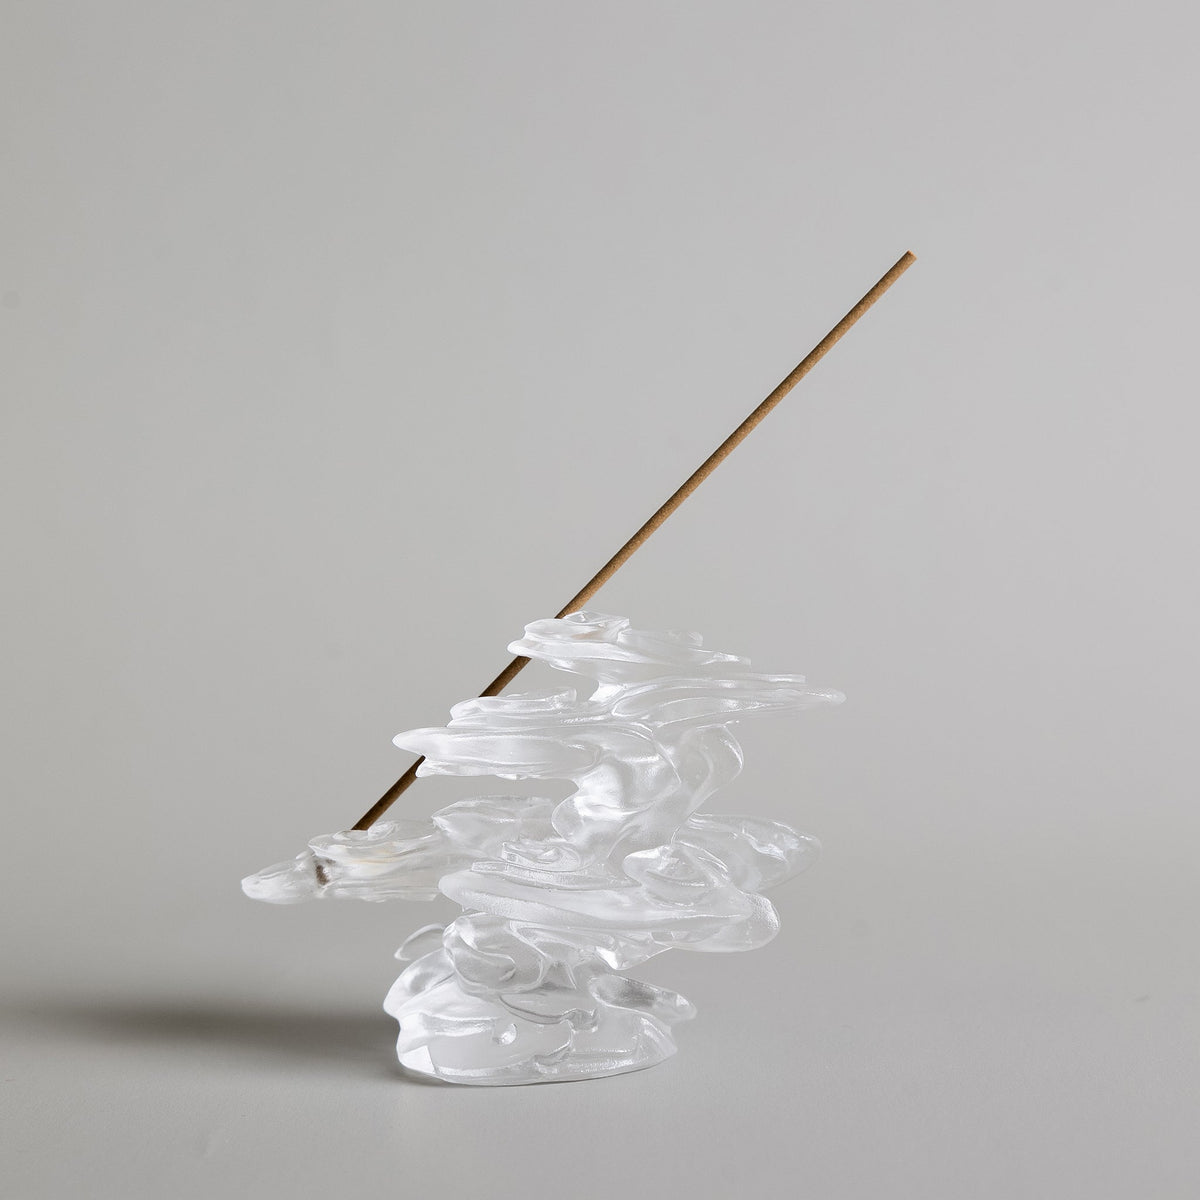 A cloud-shaped glass incense burner with an incense stick